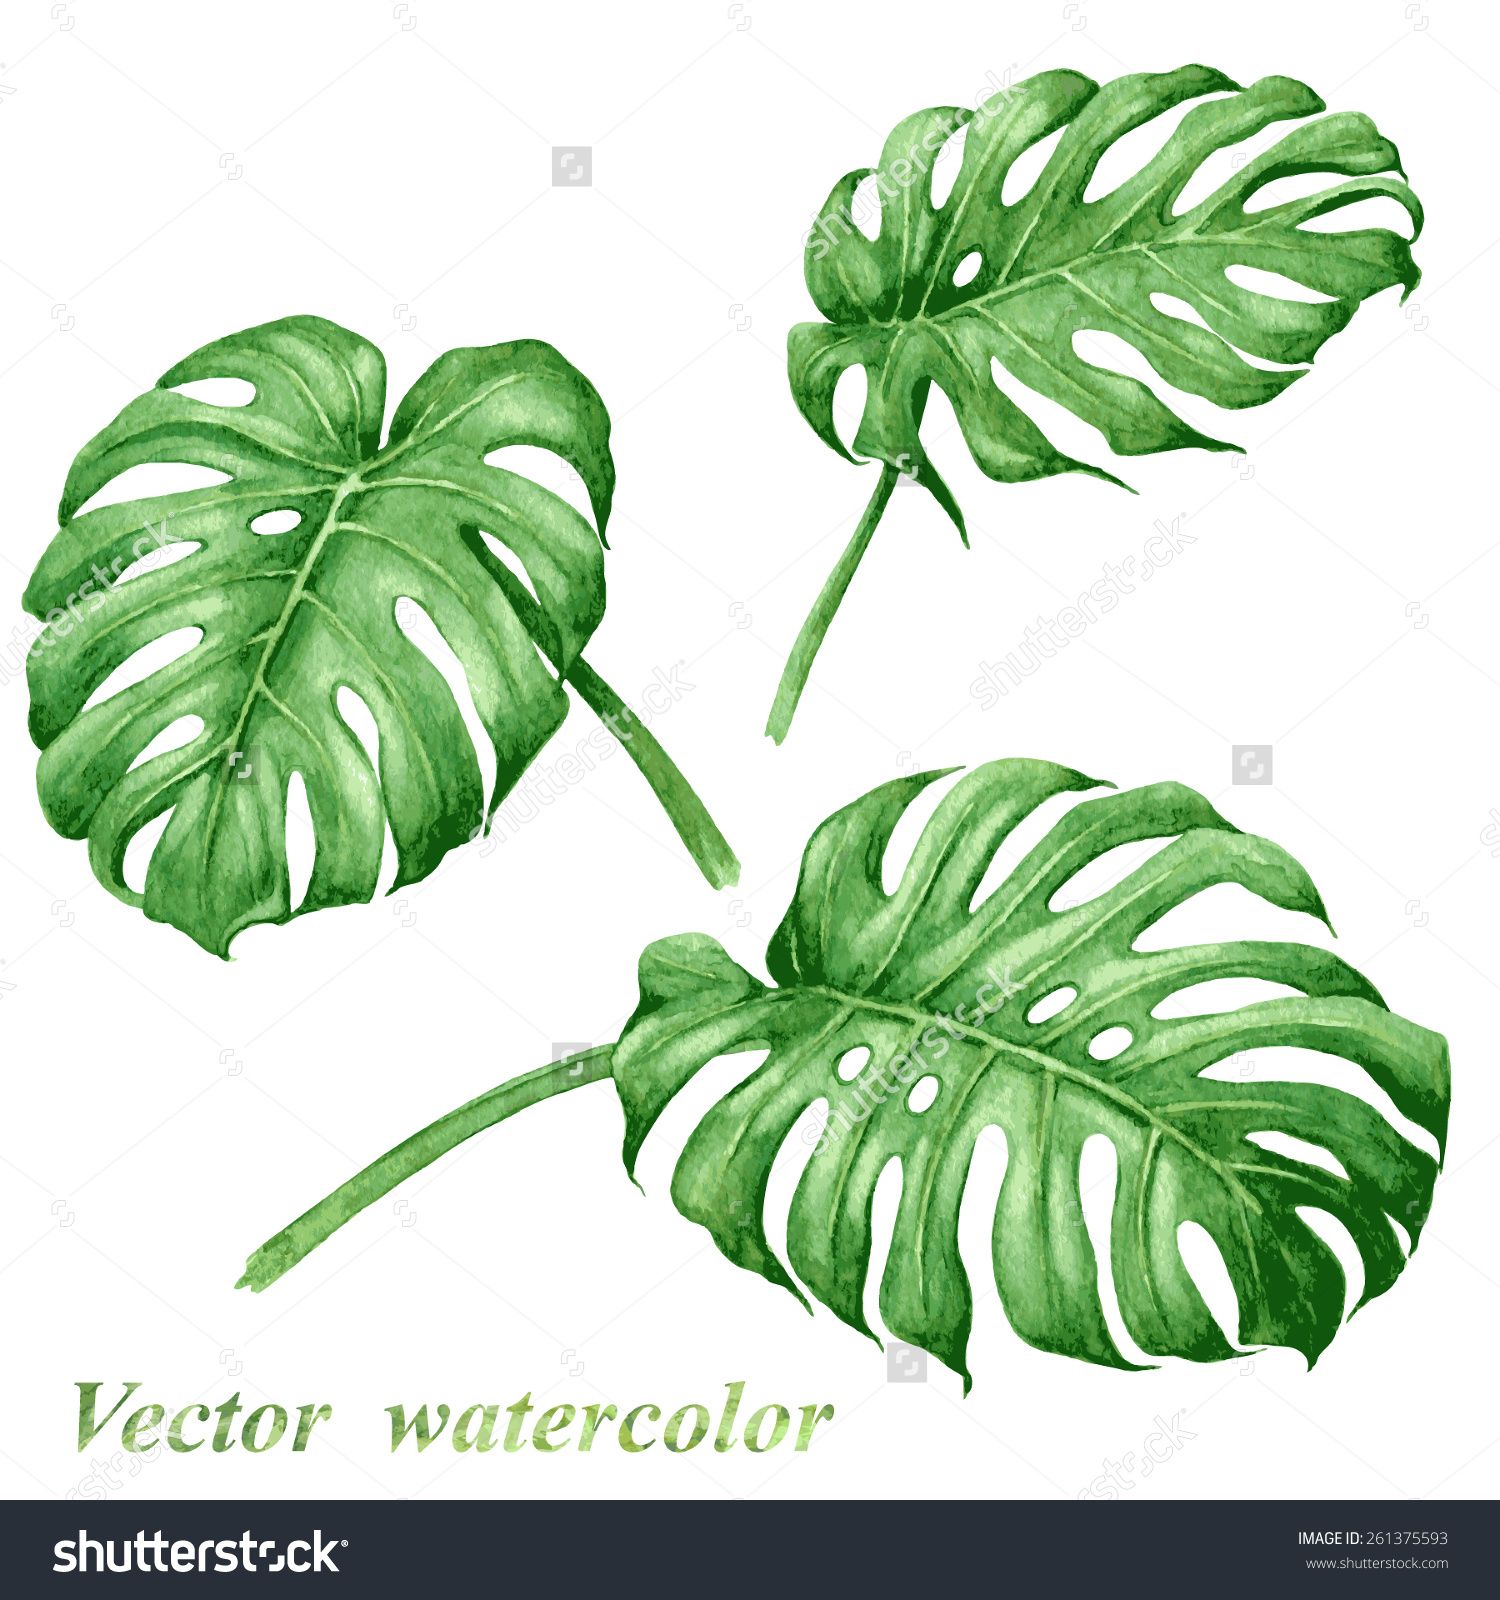 Image result for tropical foliage print art | Recycled craft ...